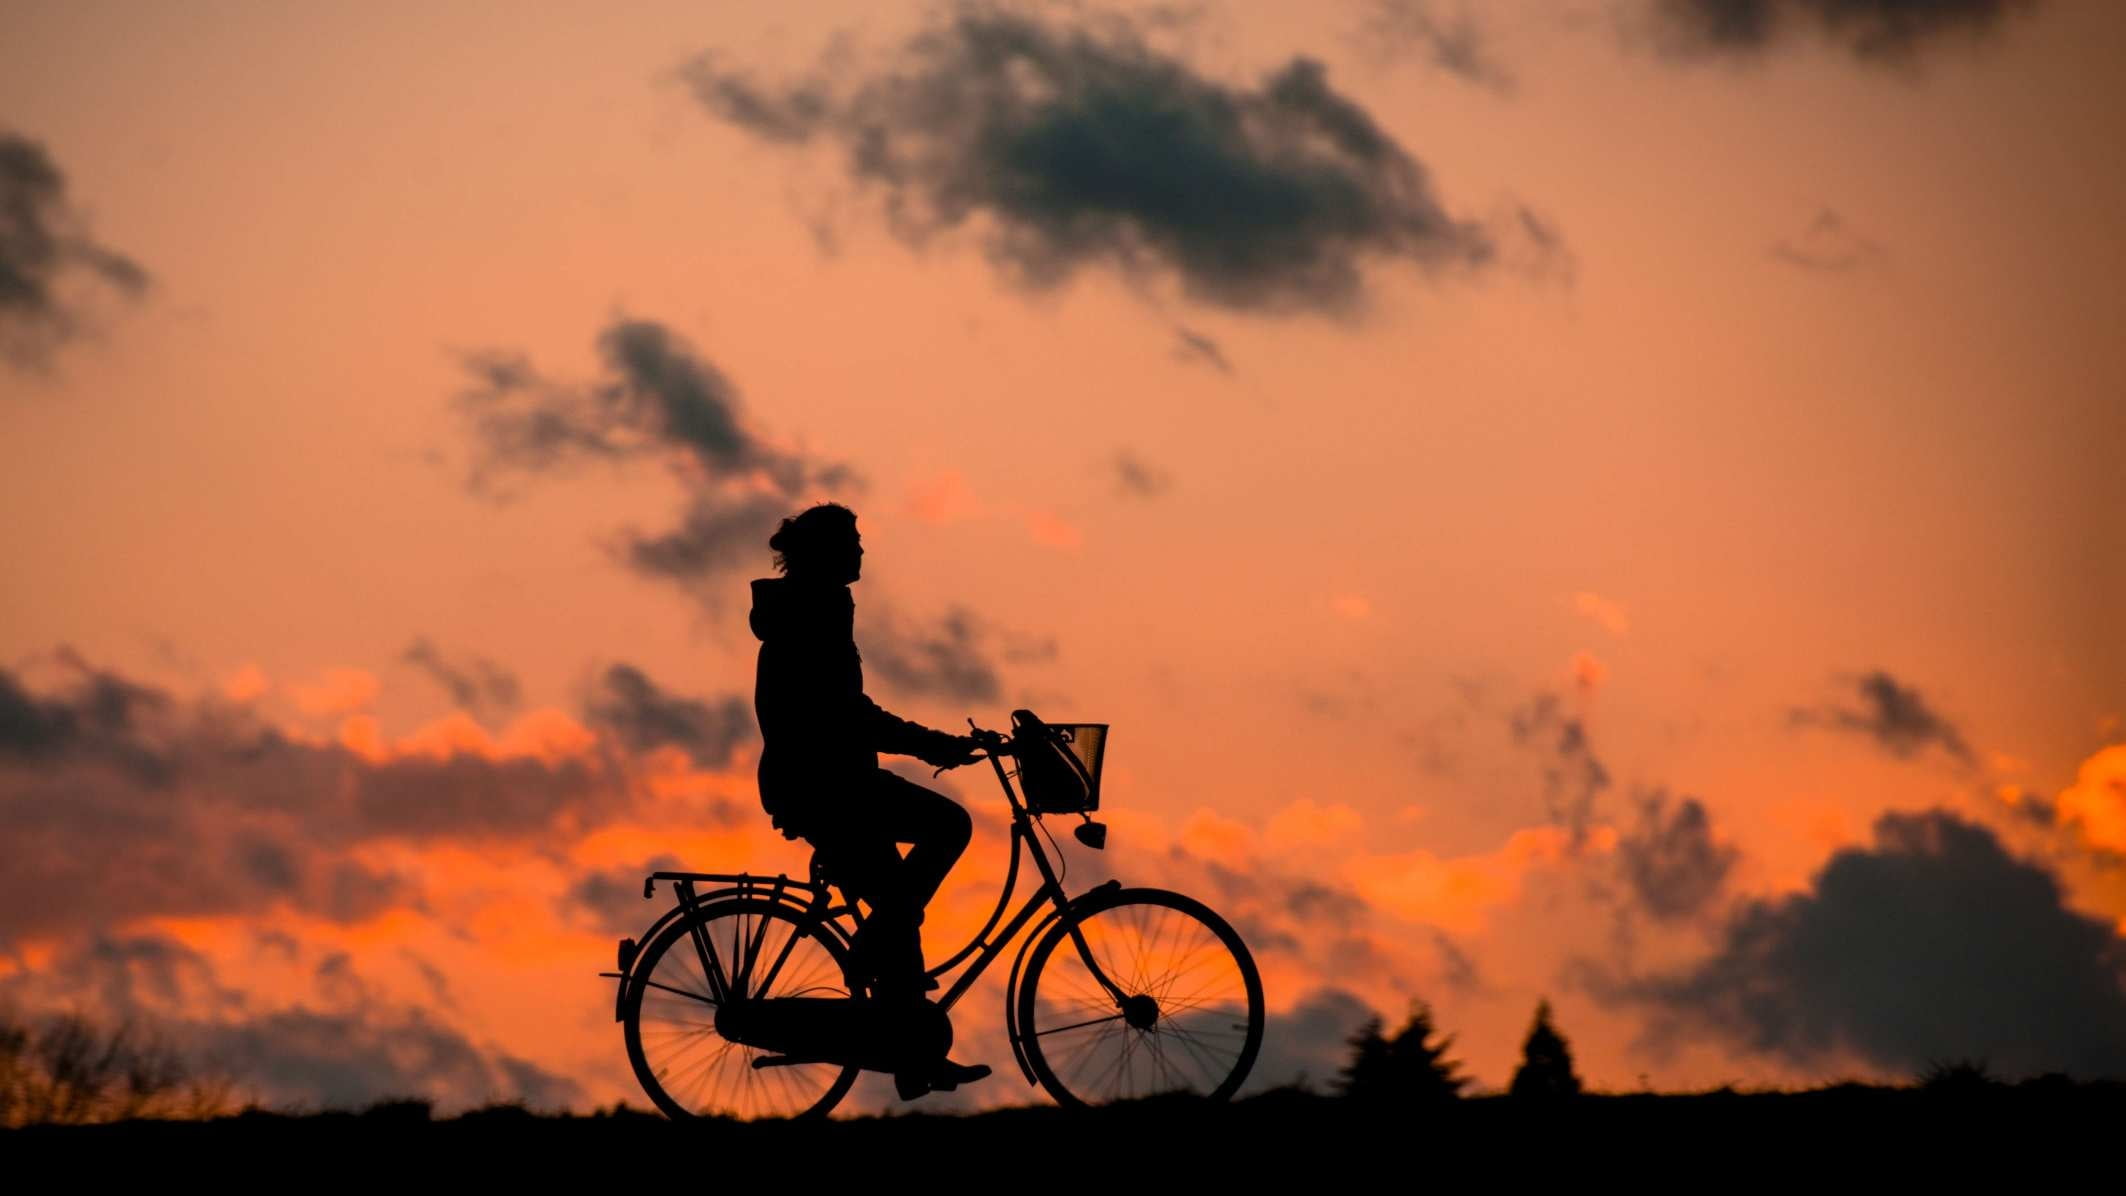 person's silhouette riding step-through frame bike during golden hour